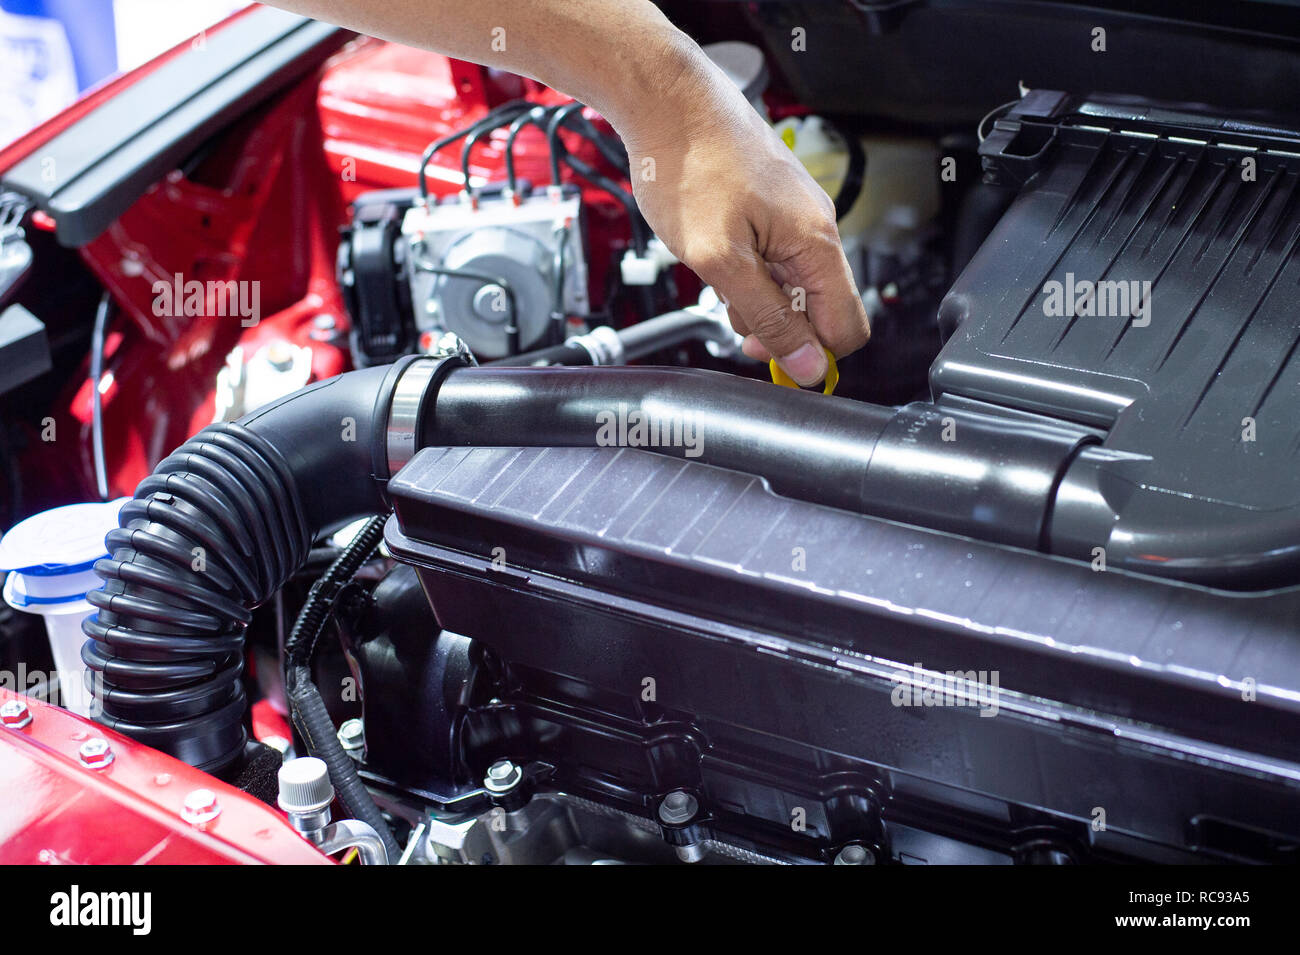 Check the engine oil level in the car by yourself. Service and maintenance of cars or vehicles - images Stock Photo